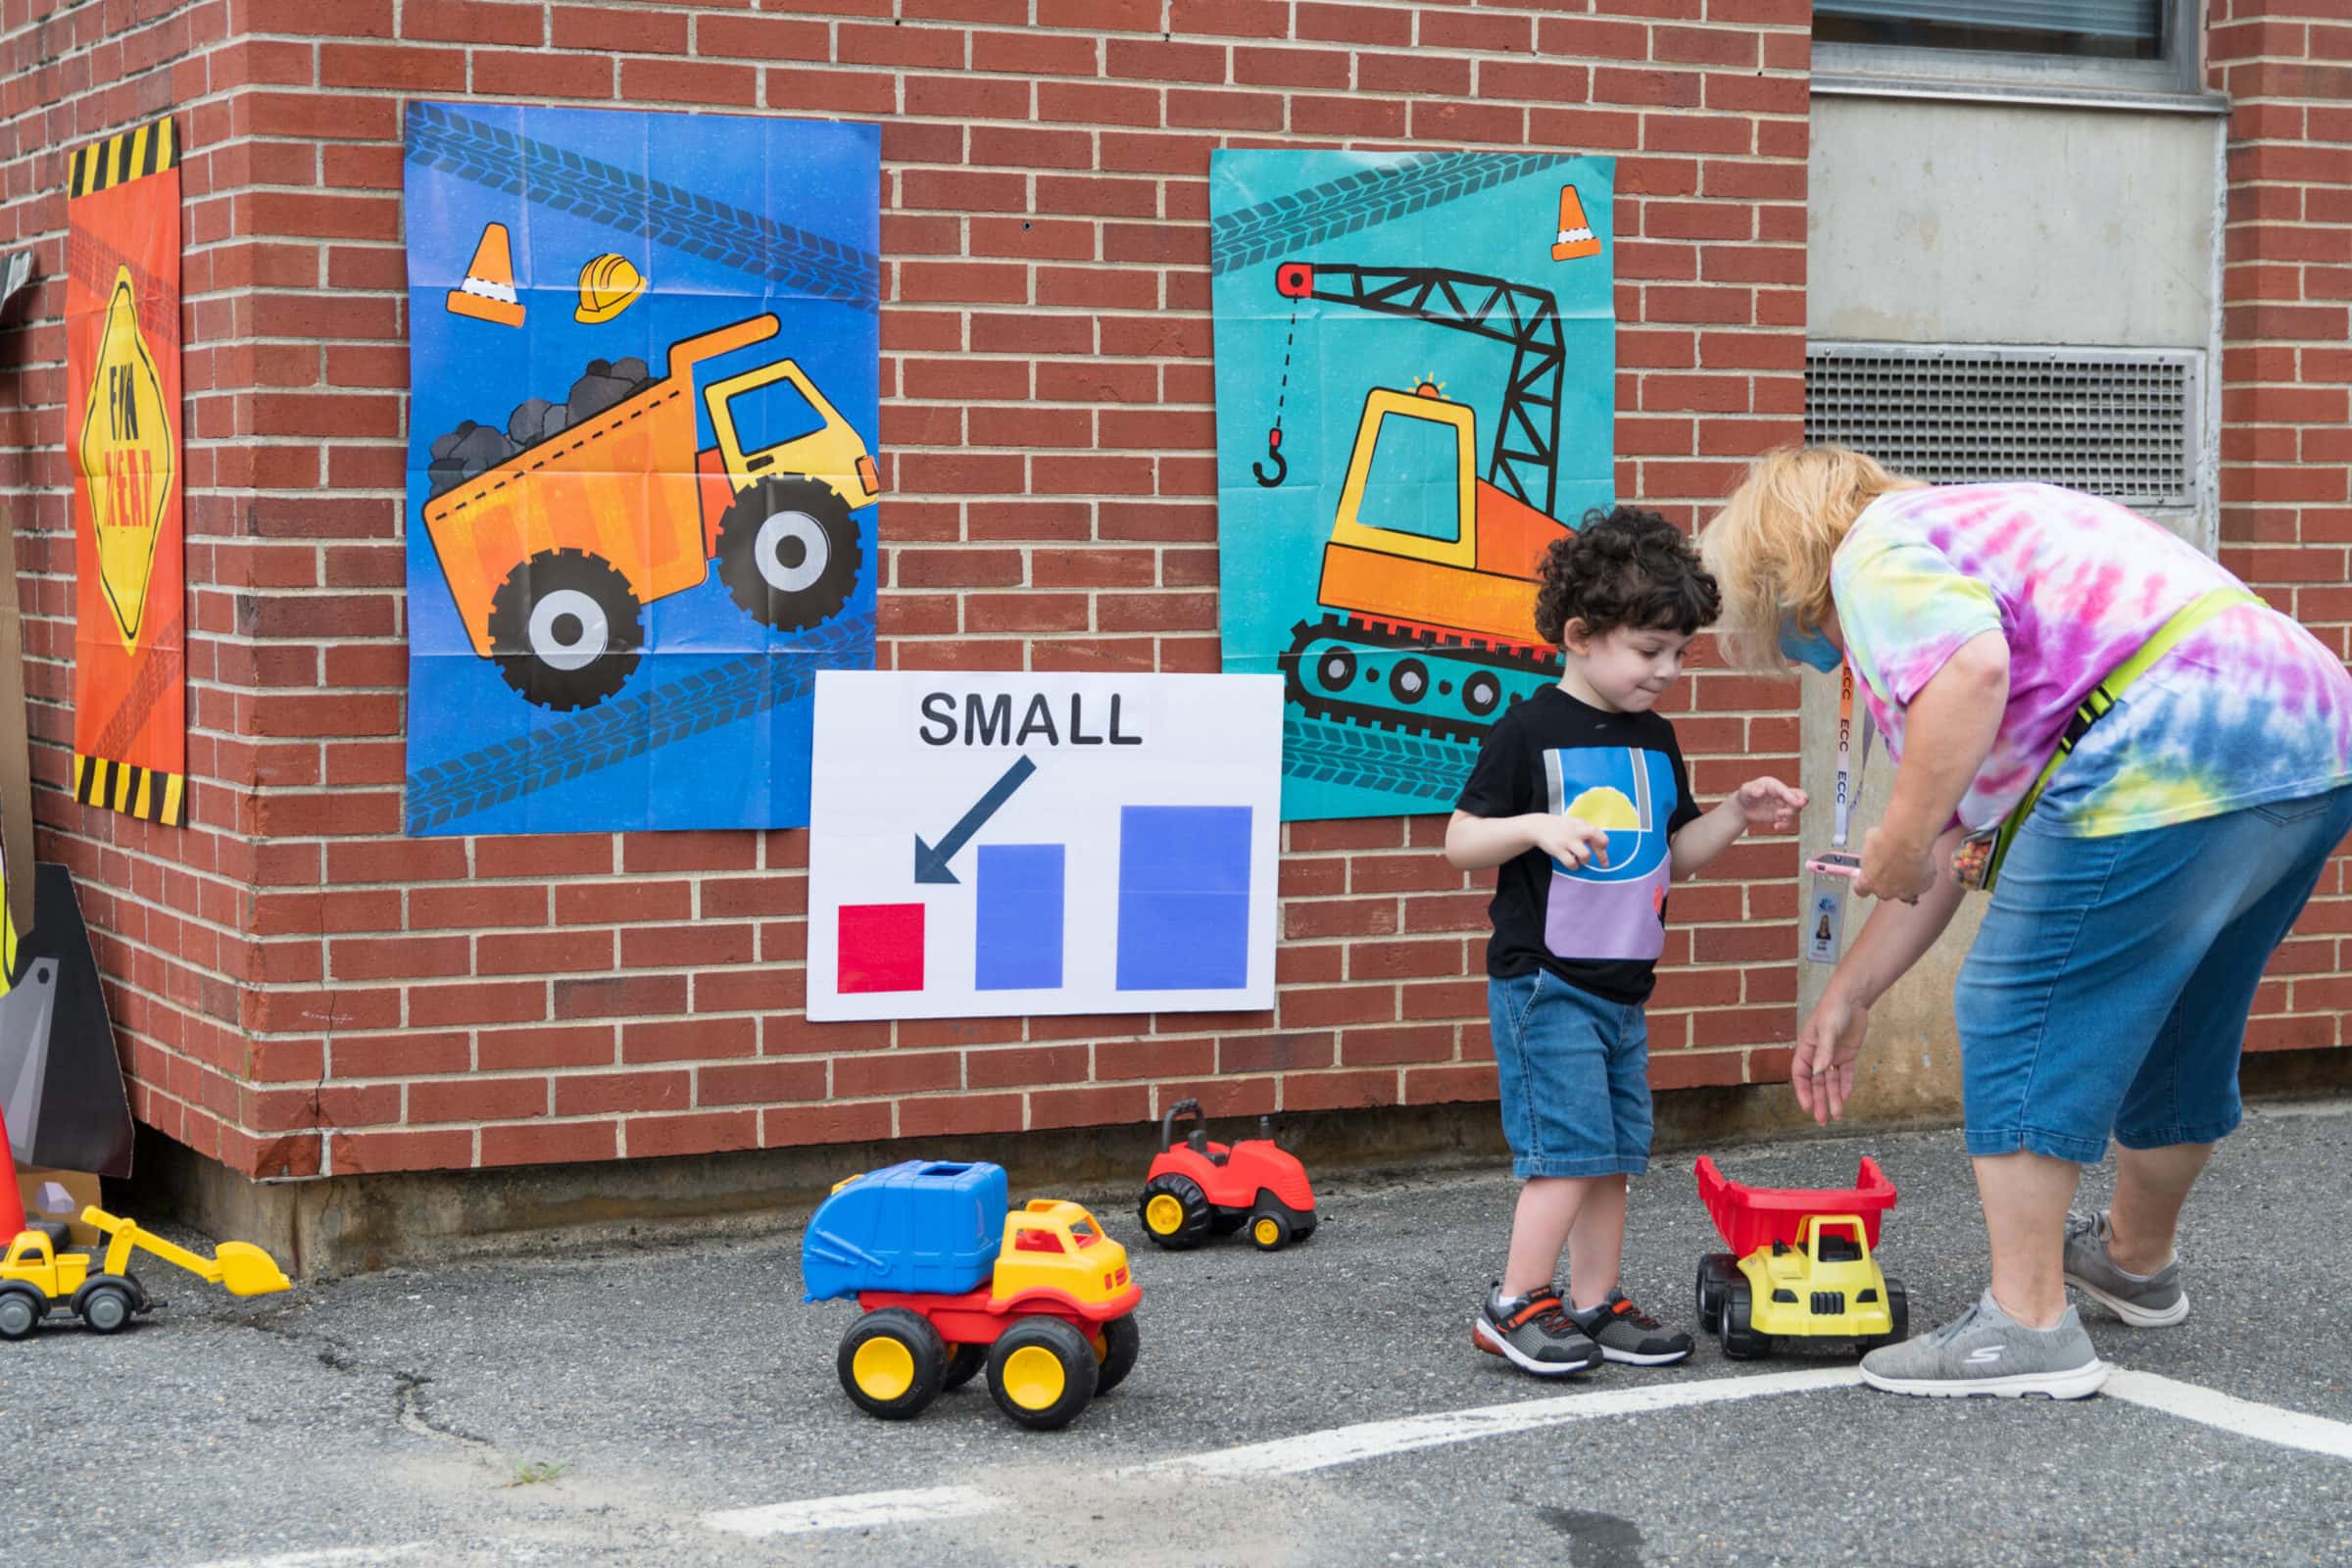 A July 29 ‘touch-a-truck’ event at the Early Childhood Center in Marlborough aimed to teach children about differences in scale, contrasting small toy trucks with actual vehicles from the city’s DPW. (Photo/Jesse Kucewicz)